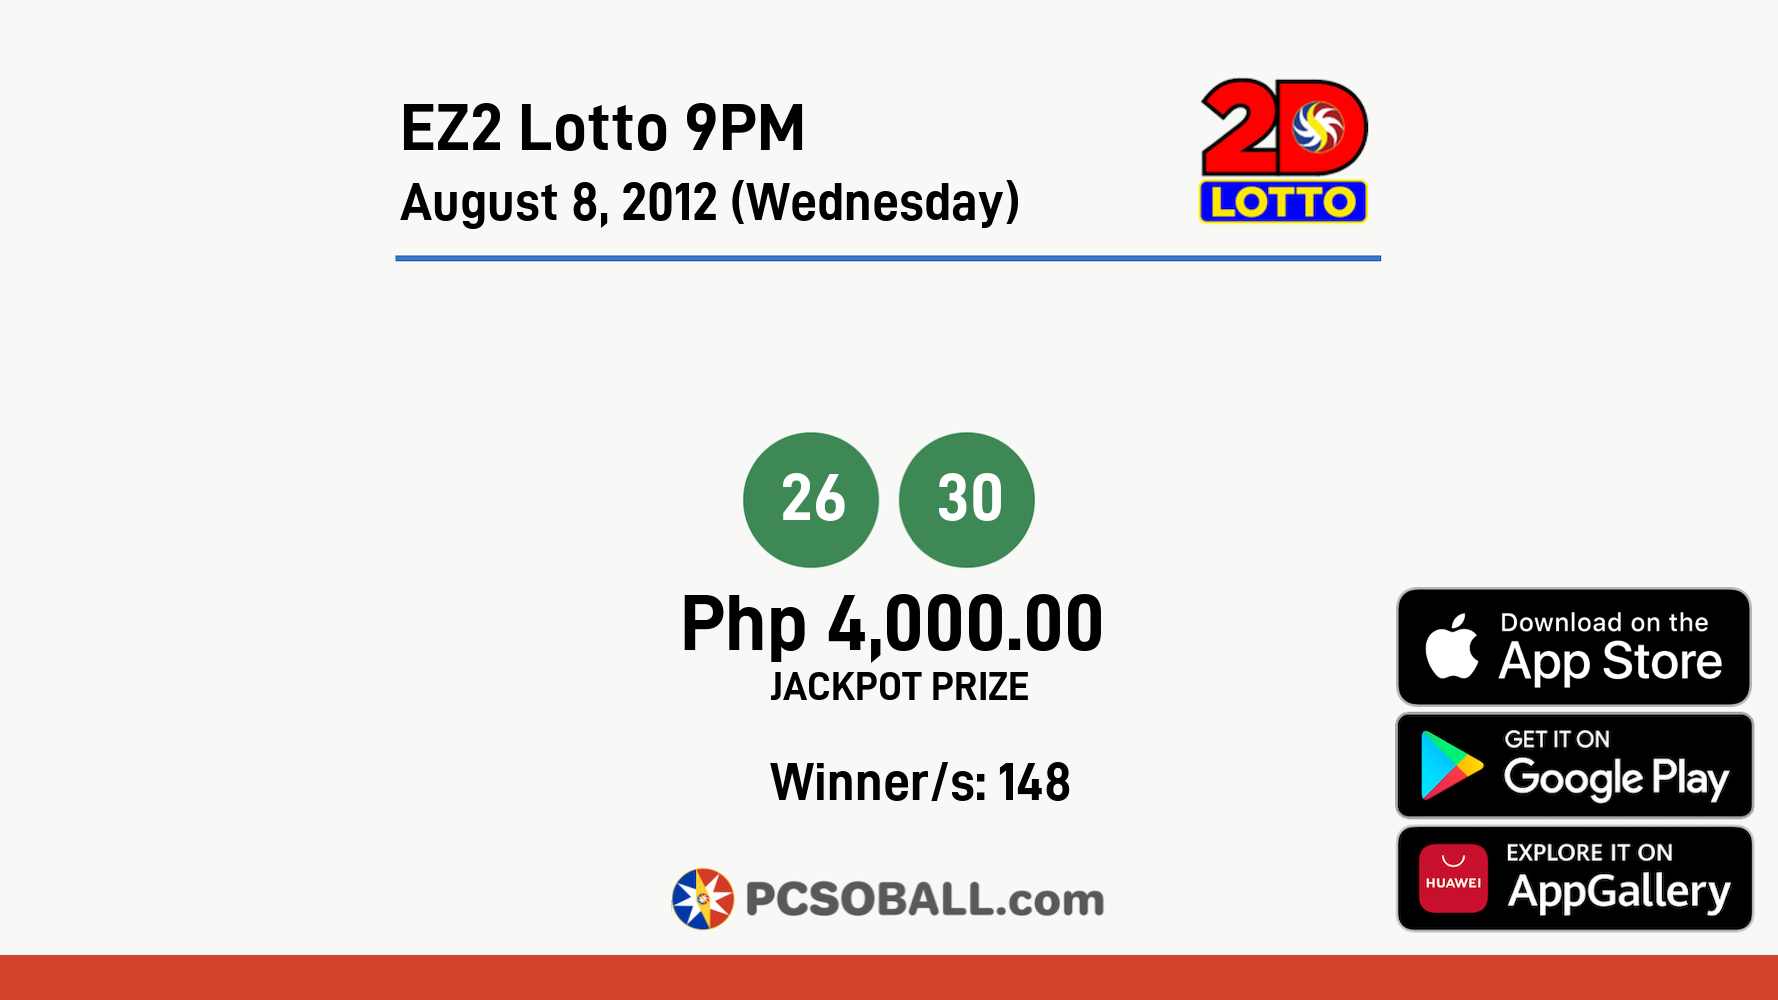 EZ2 Lotto 9PM August 8, 2012 (Wednesday) Result